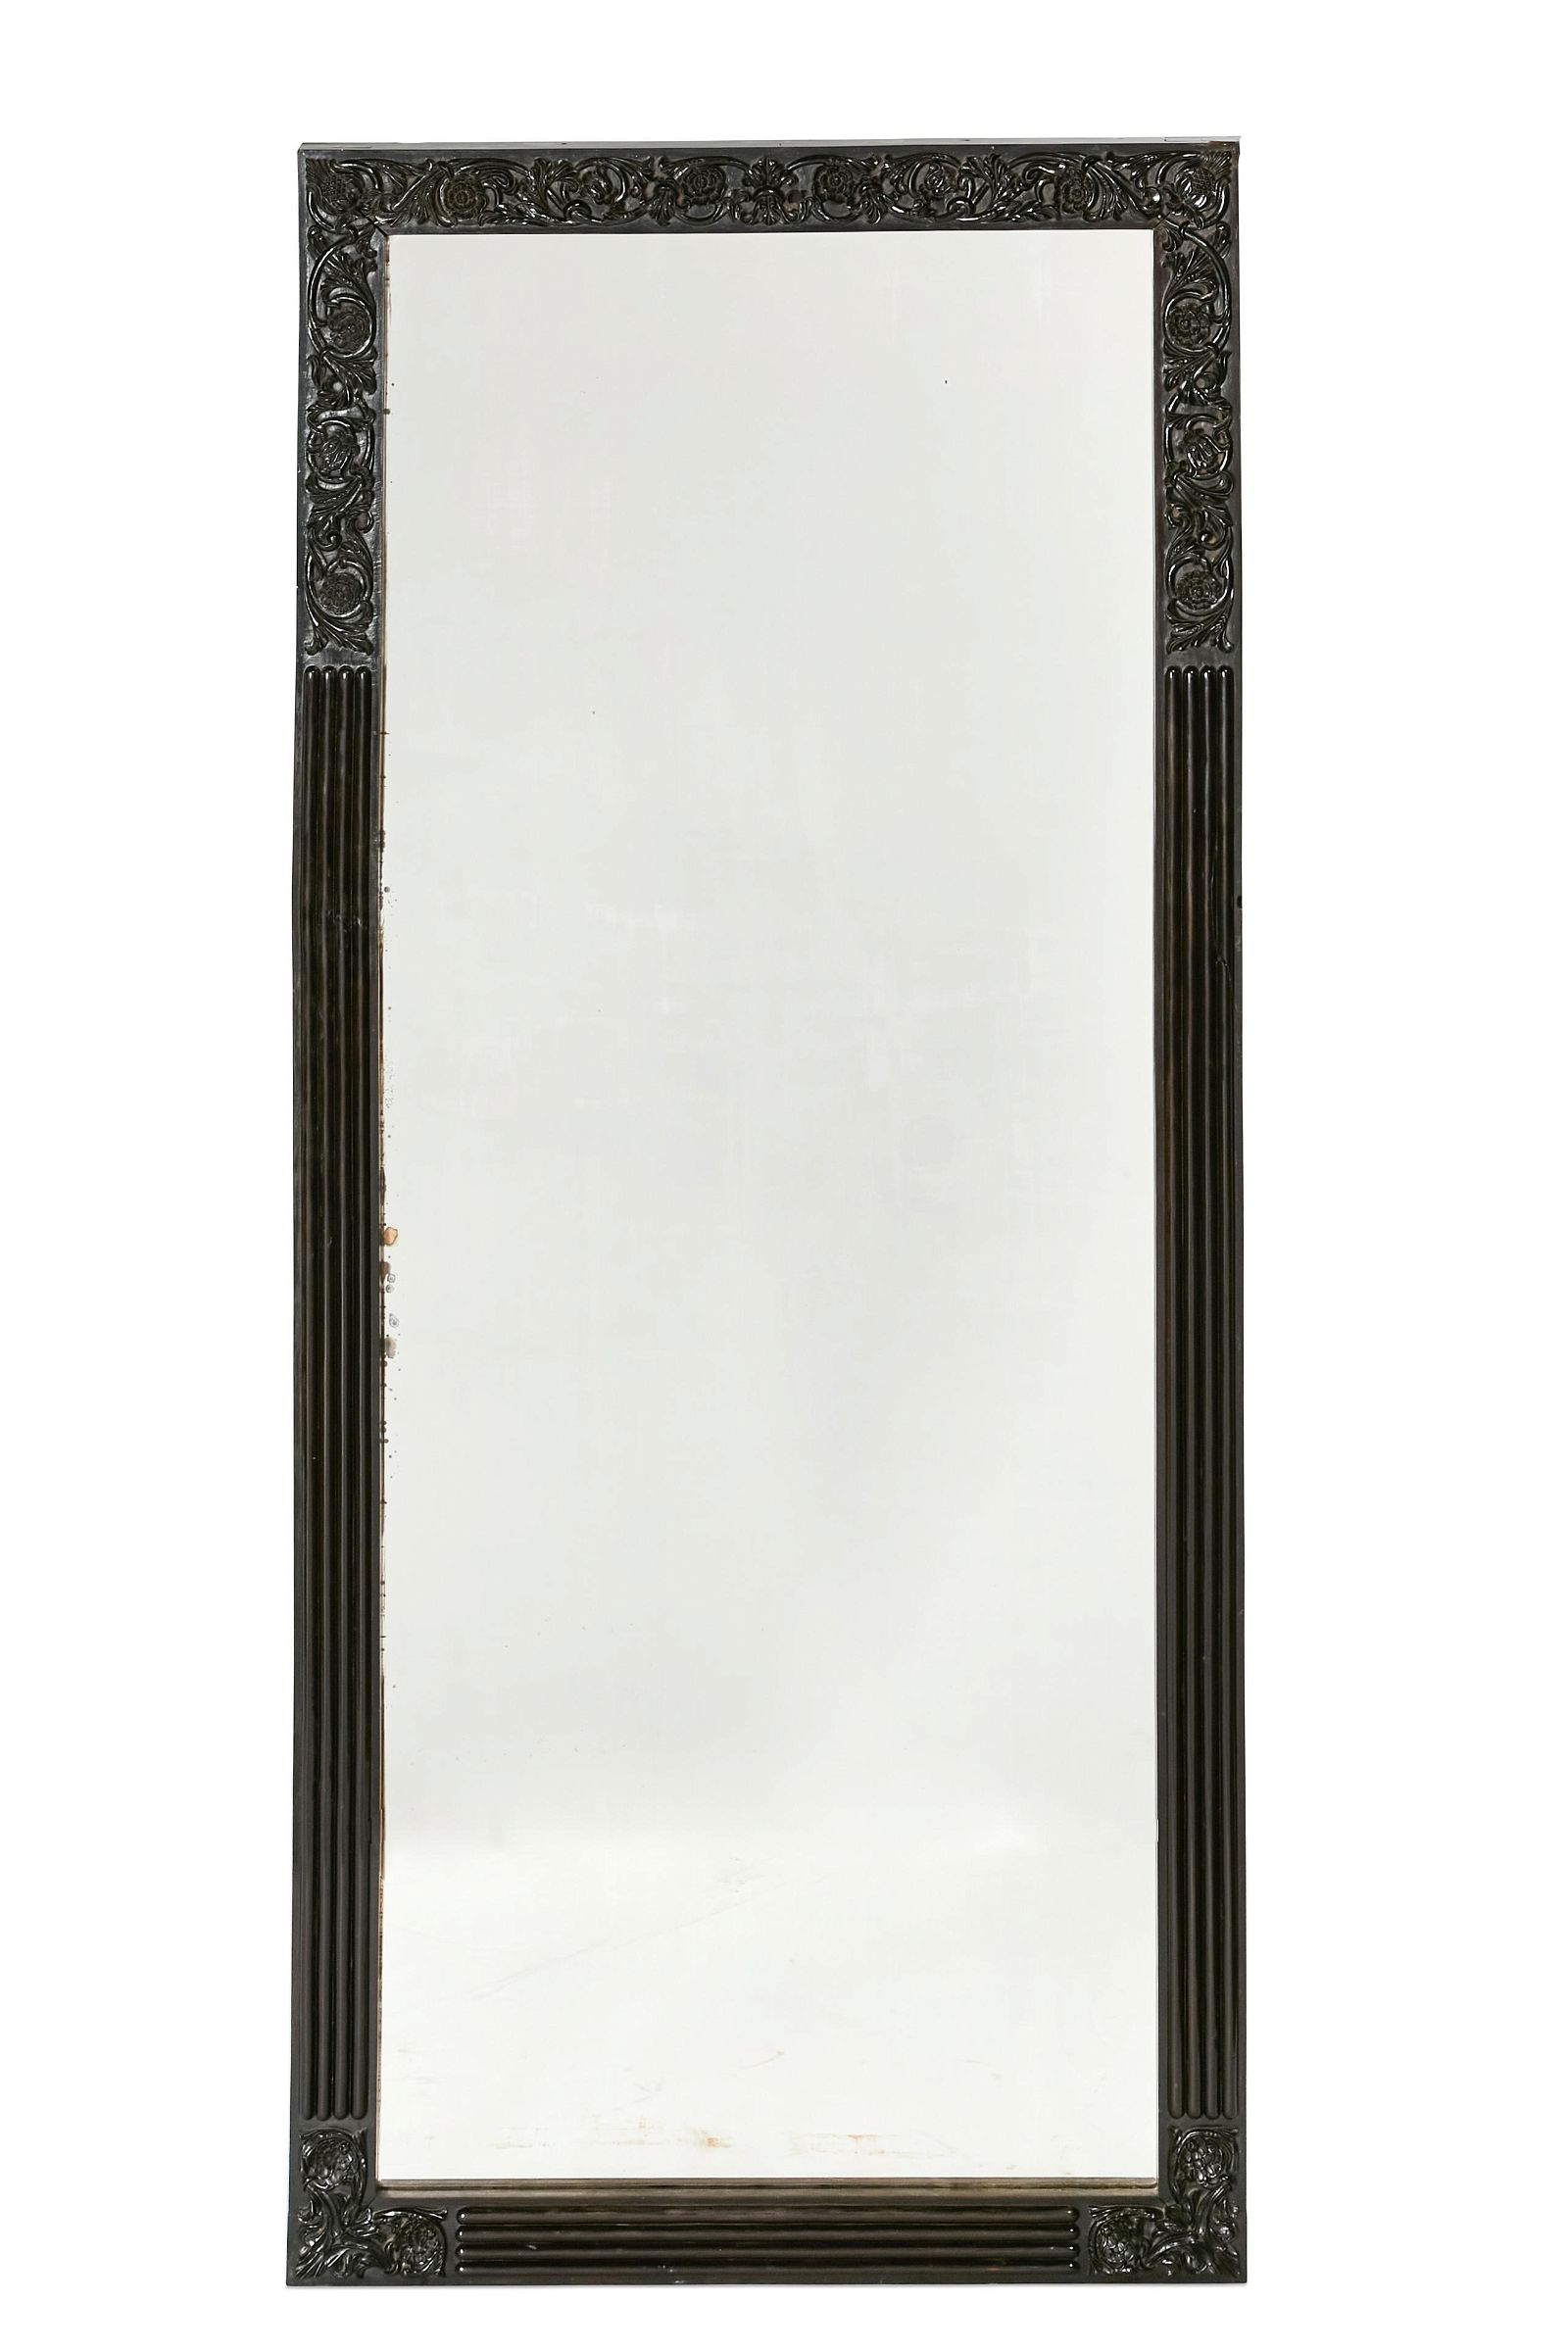 AN ANGLO INDIAN CARVED EBONY MIRRORAn 2fb263d